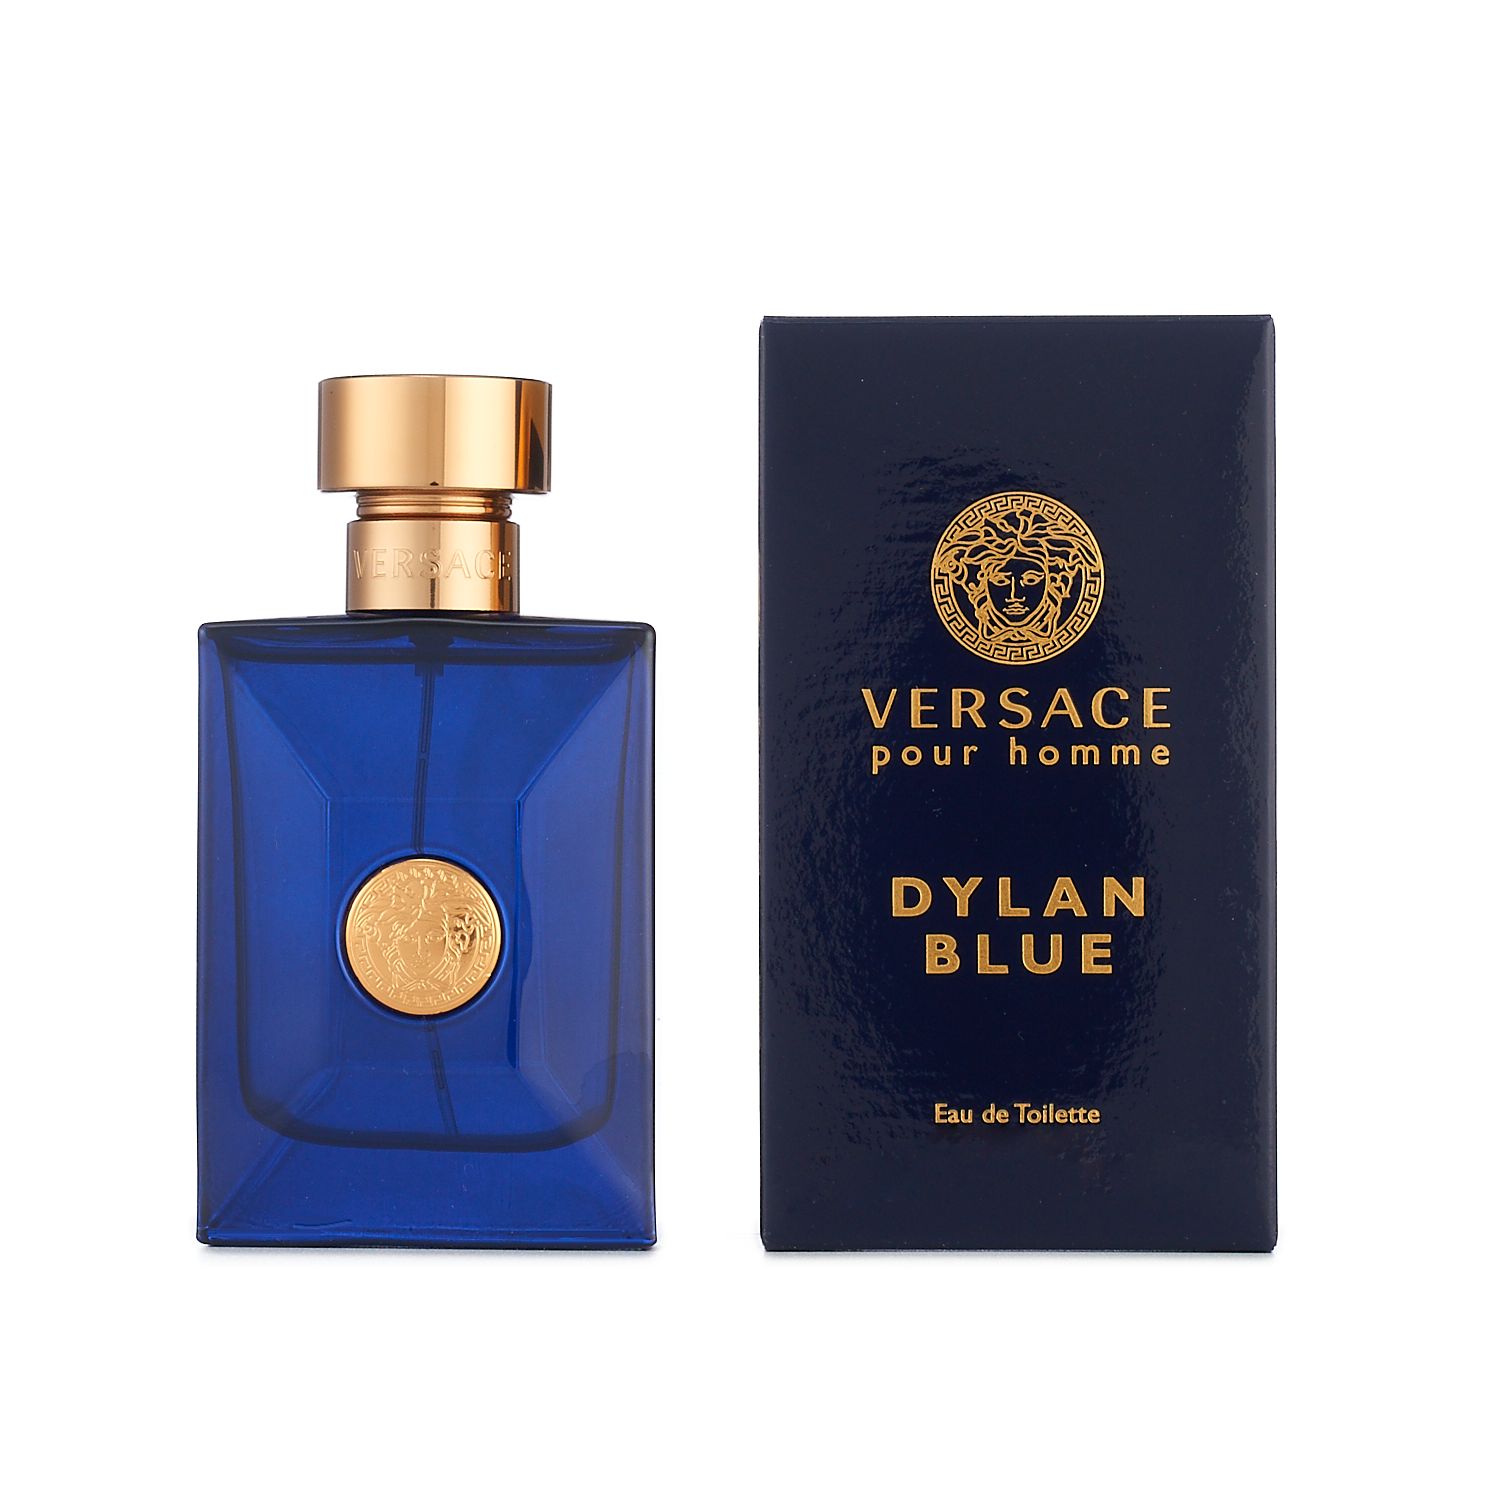 cologne similar to versace dylan blue